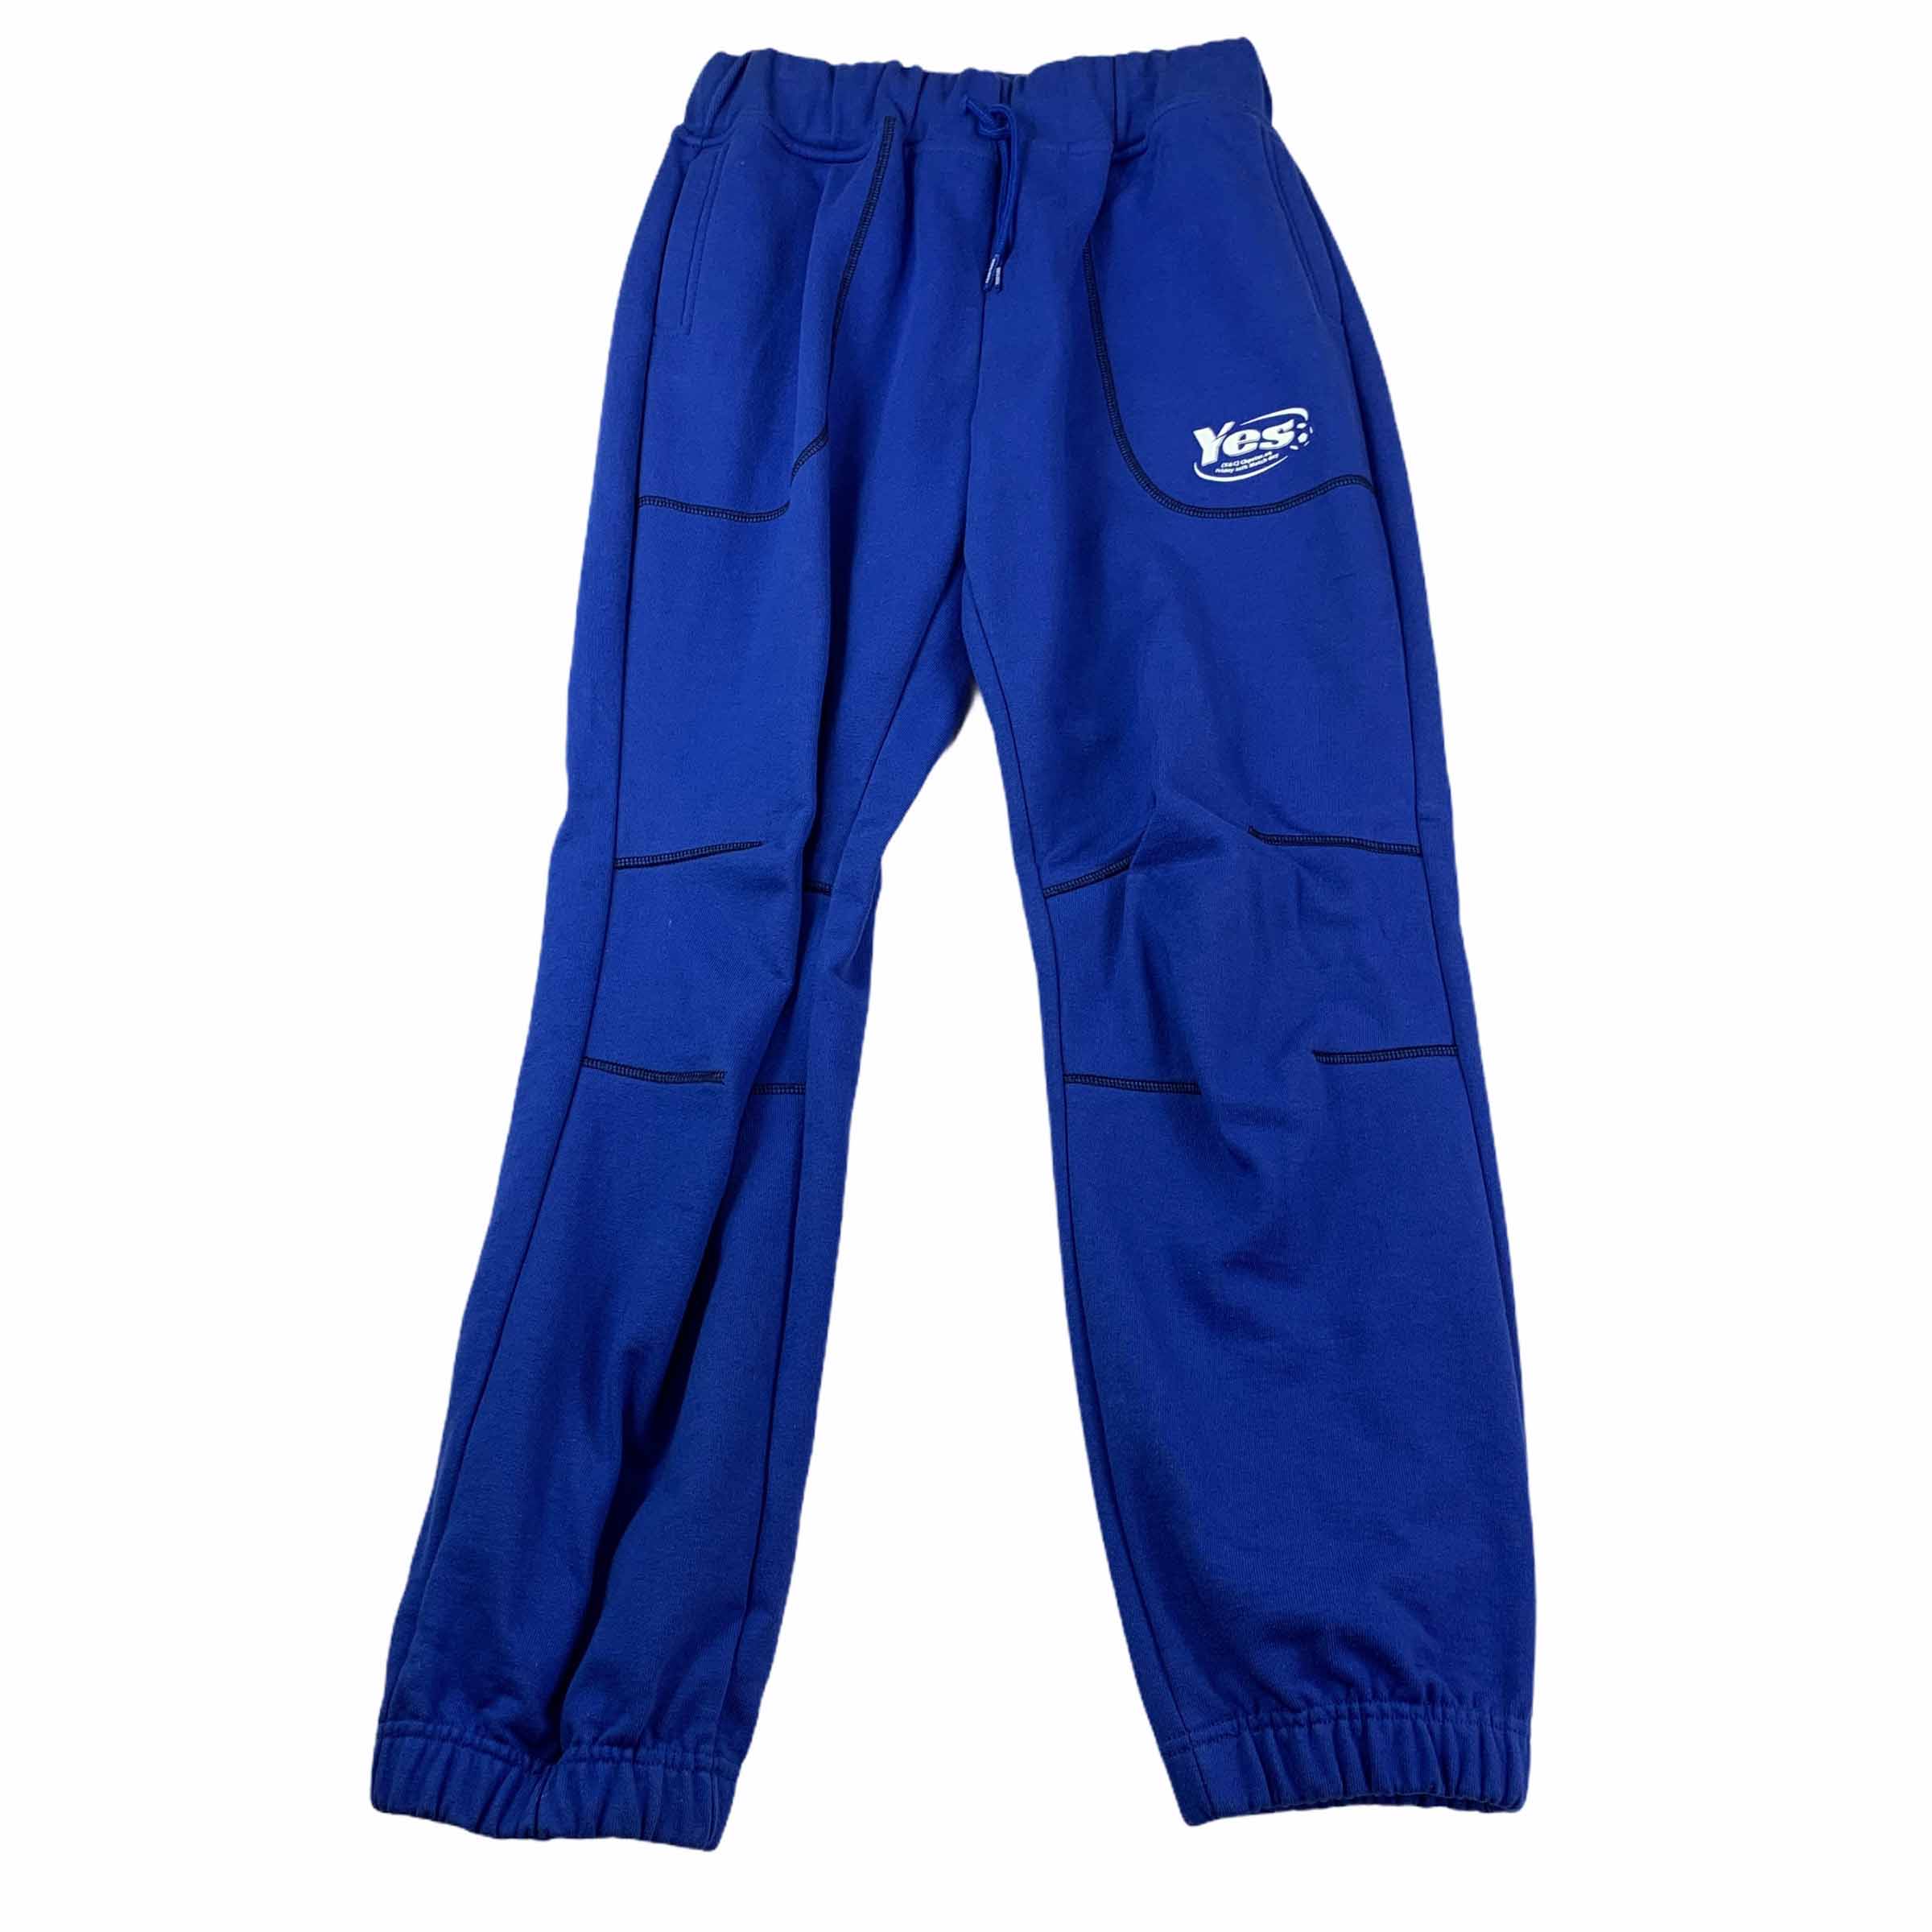 [Yes Eye See] Track Pants BL - Size M